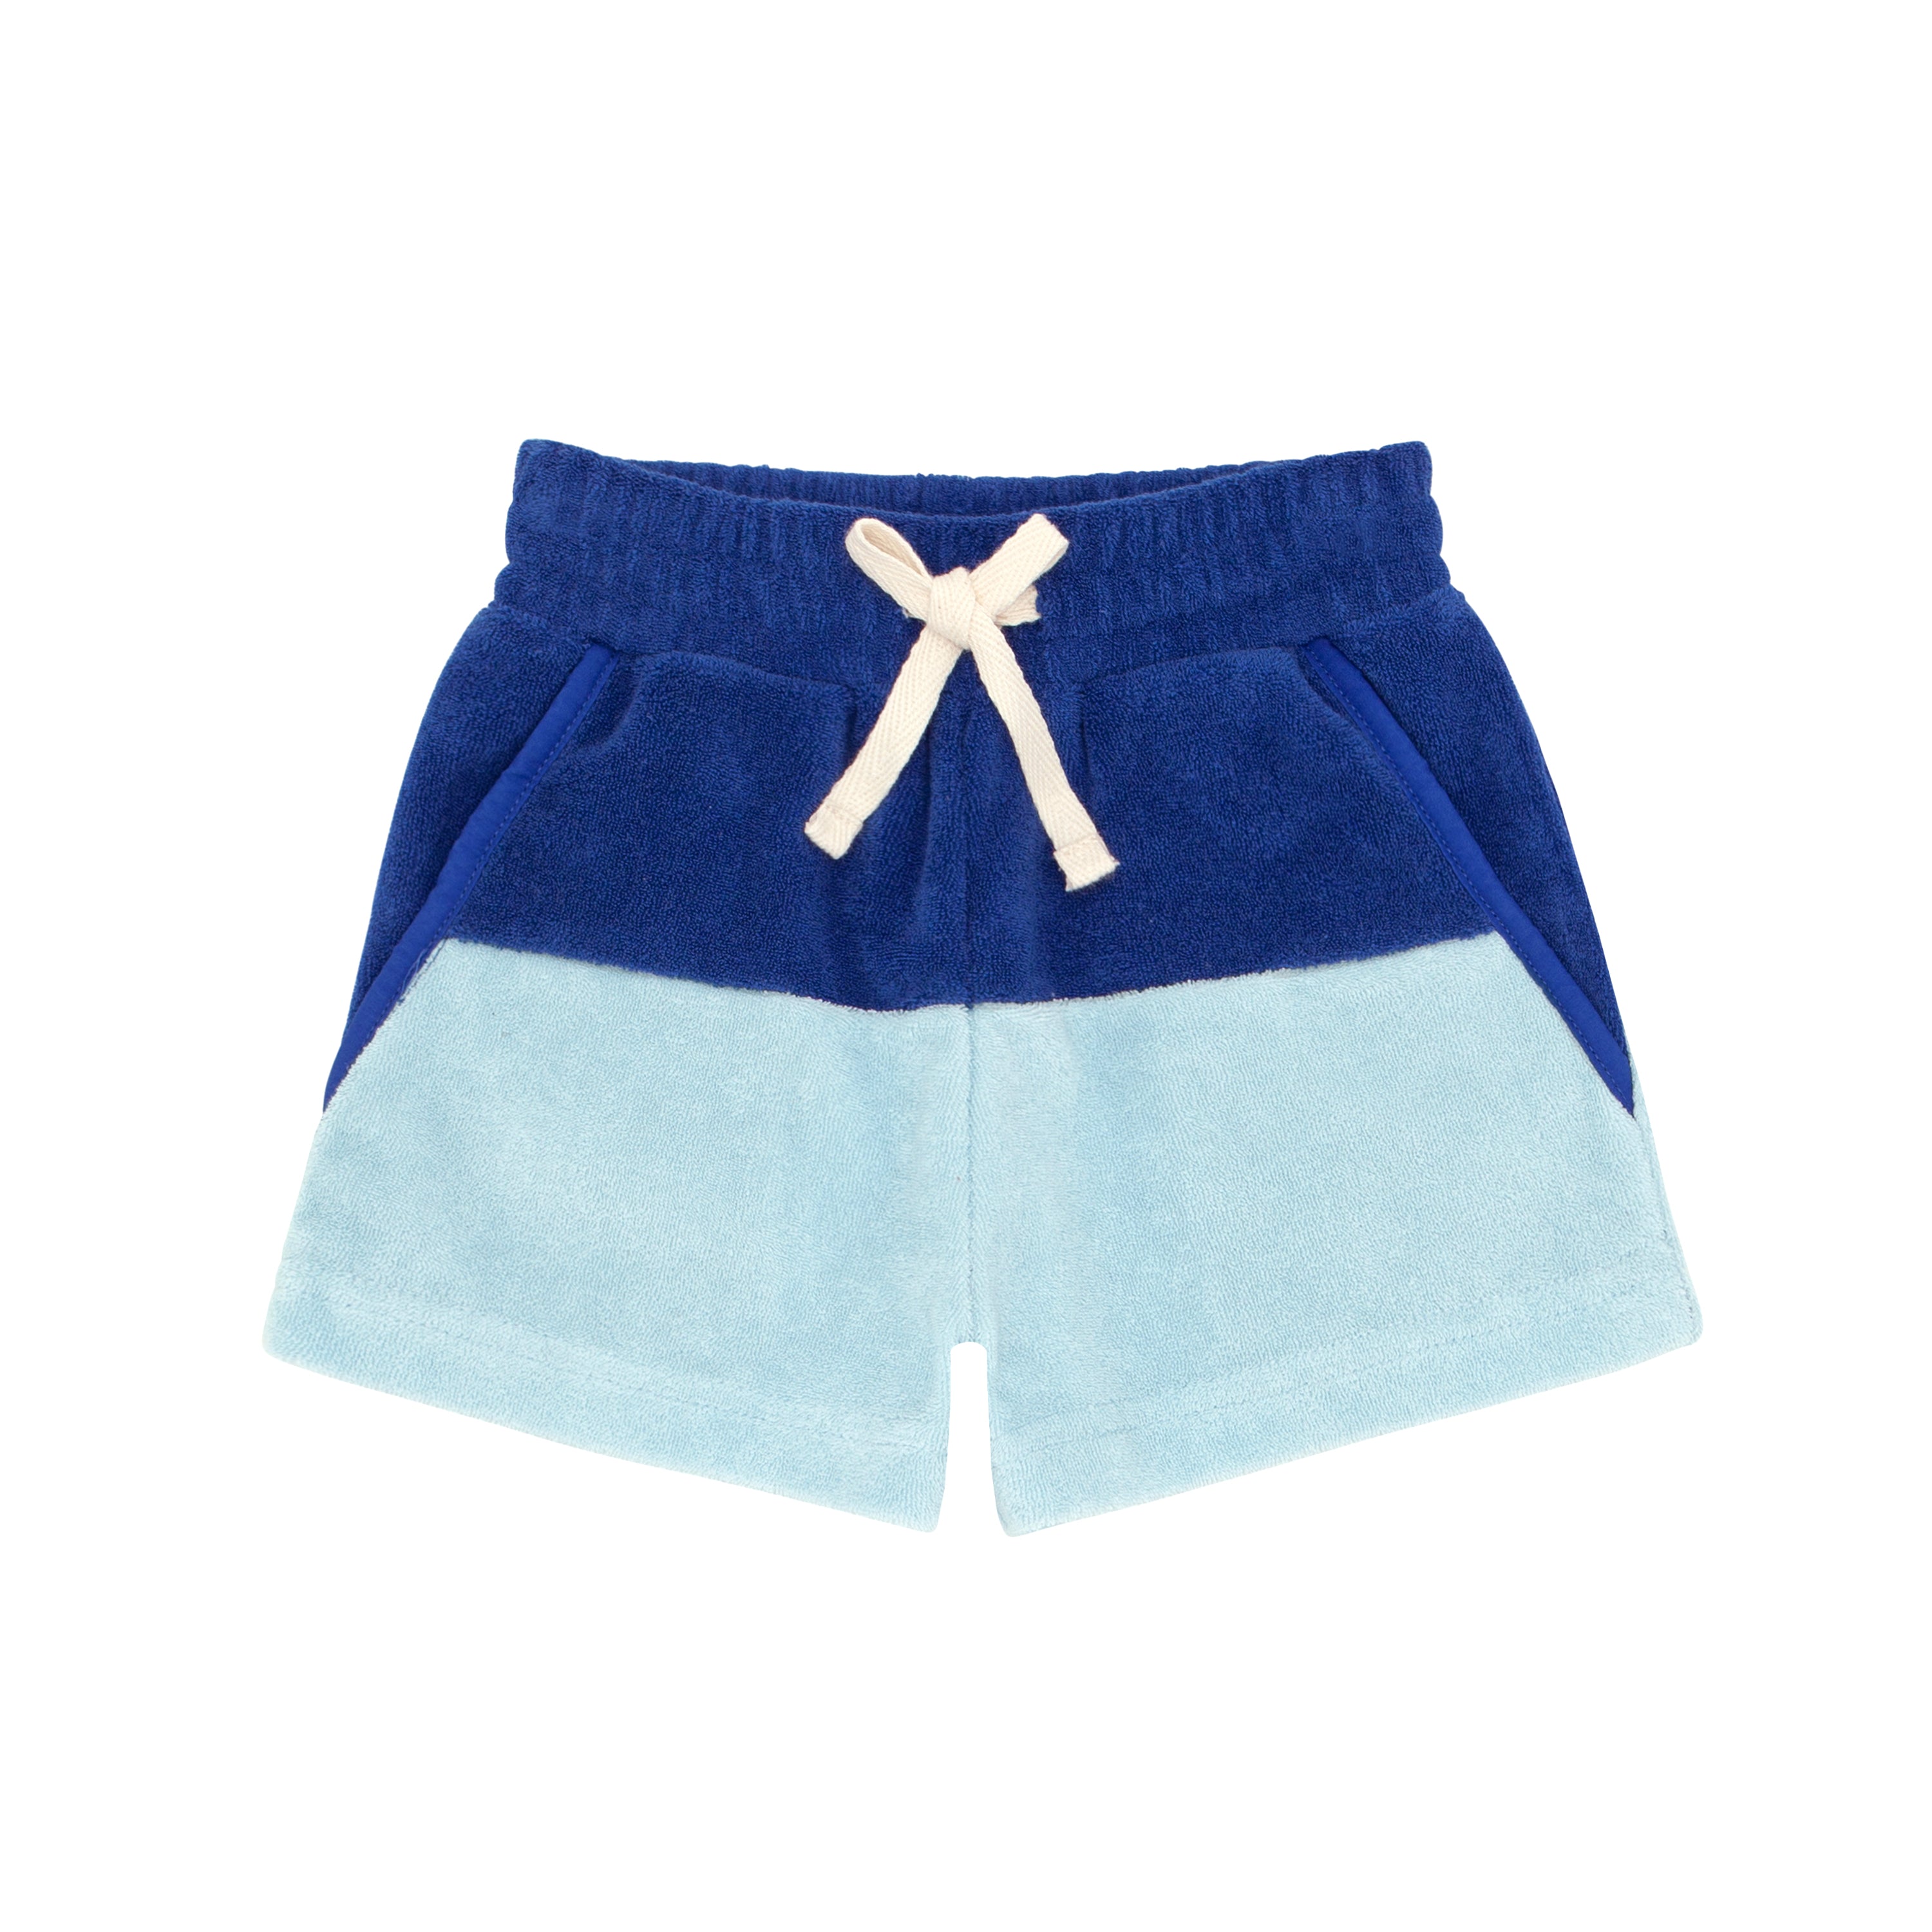 Boys Pacific and Cove Blue Colorblock French Terry Short